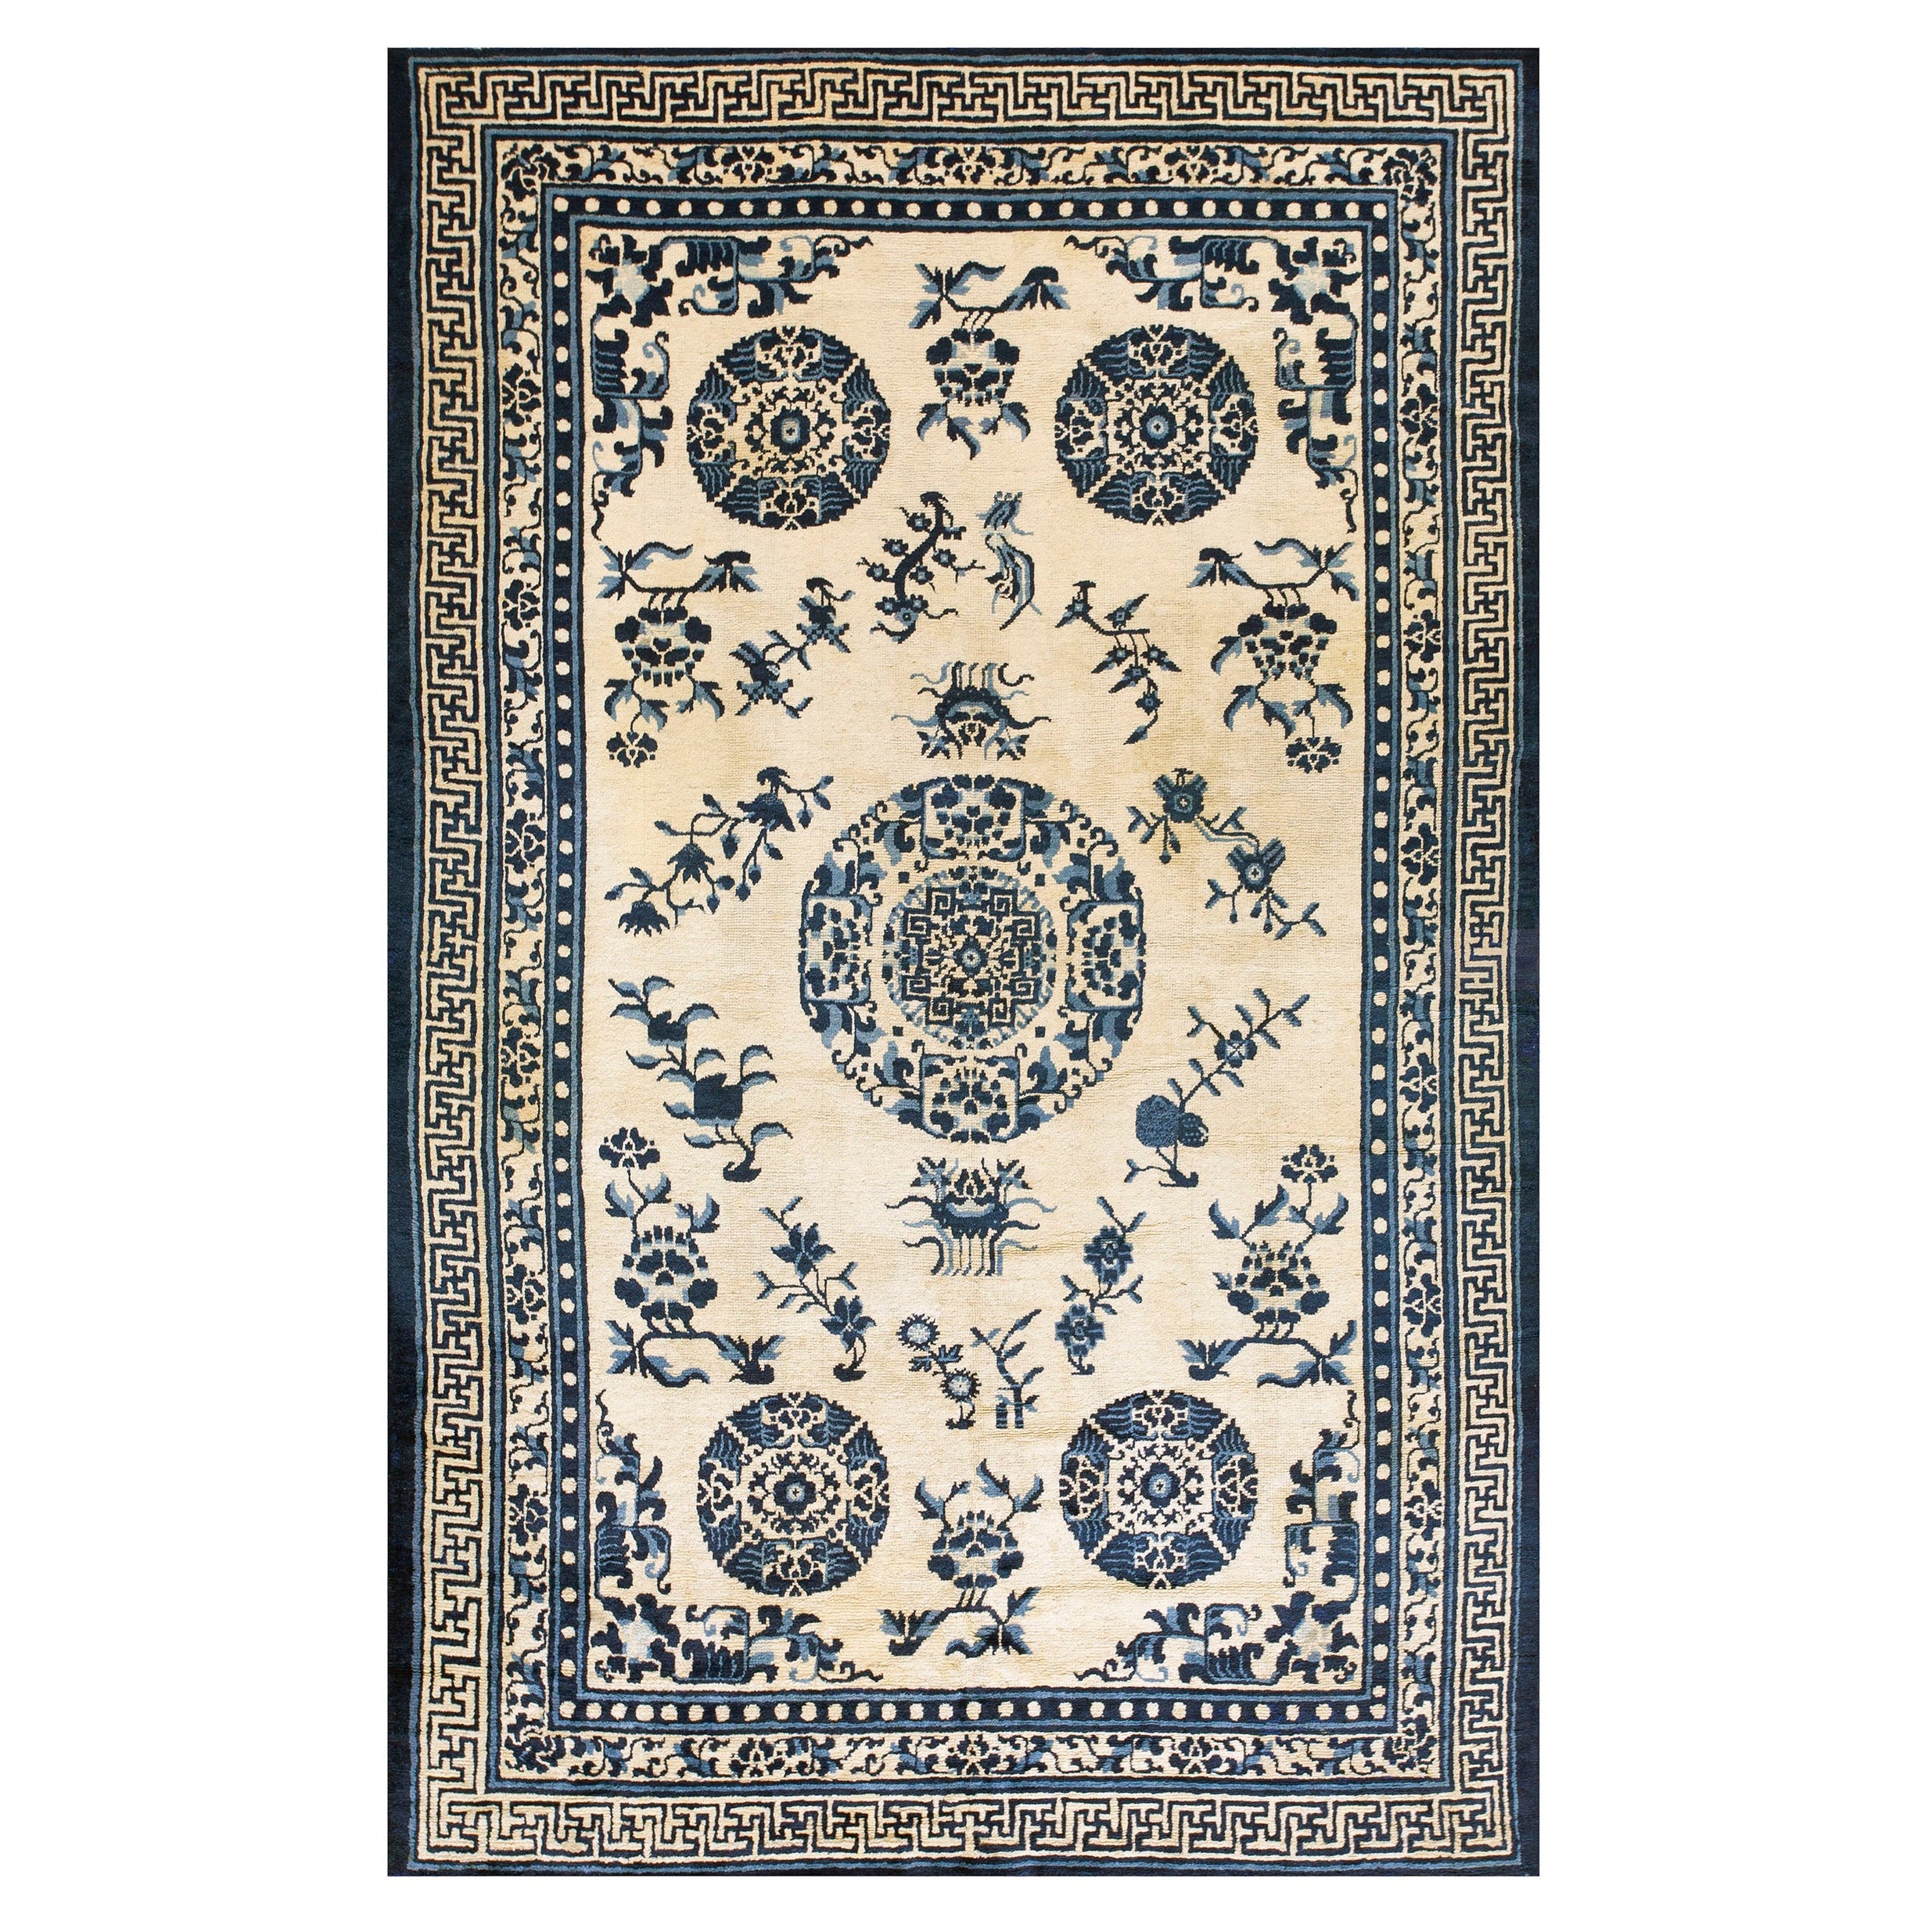 Mid 19th Century Chinese Ningxia Carpet ( 5'9" x 9'2" - 175 x 280 ) For Sale